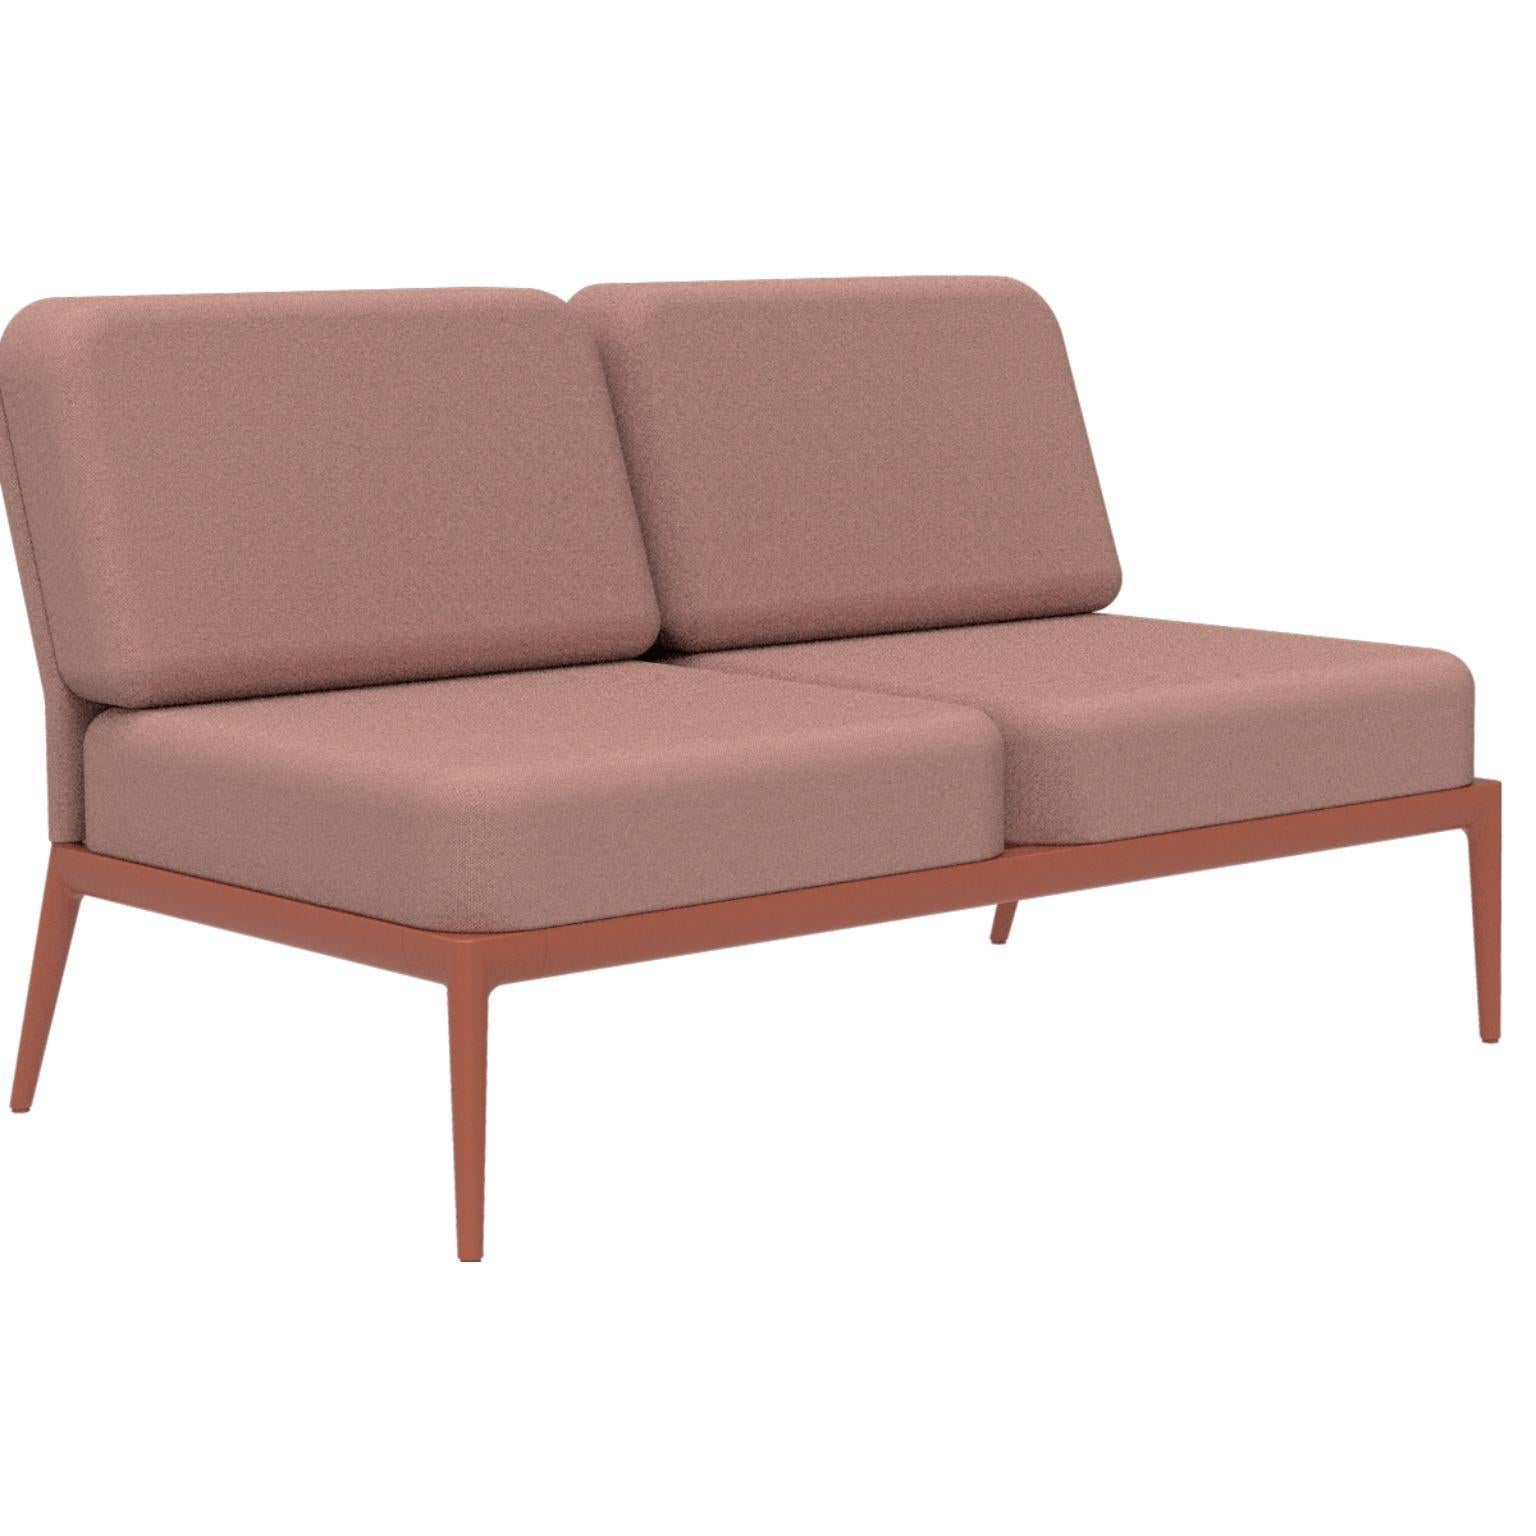 Cover Navy Double Central Modular Sofa by MOWEE.
Dimensions: D83 x W136 x H81 cm (seat height 42 cm).
Material: Aluminum and upholstery.
Weight: 27 kg.
Also available in different colors and finishes.

An unmistakable collection for its beauty